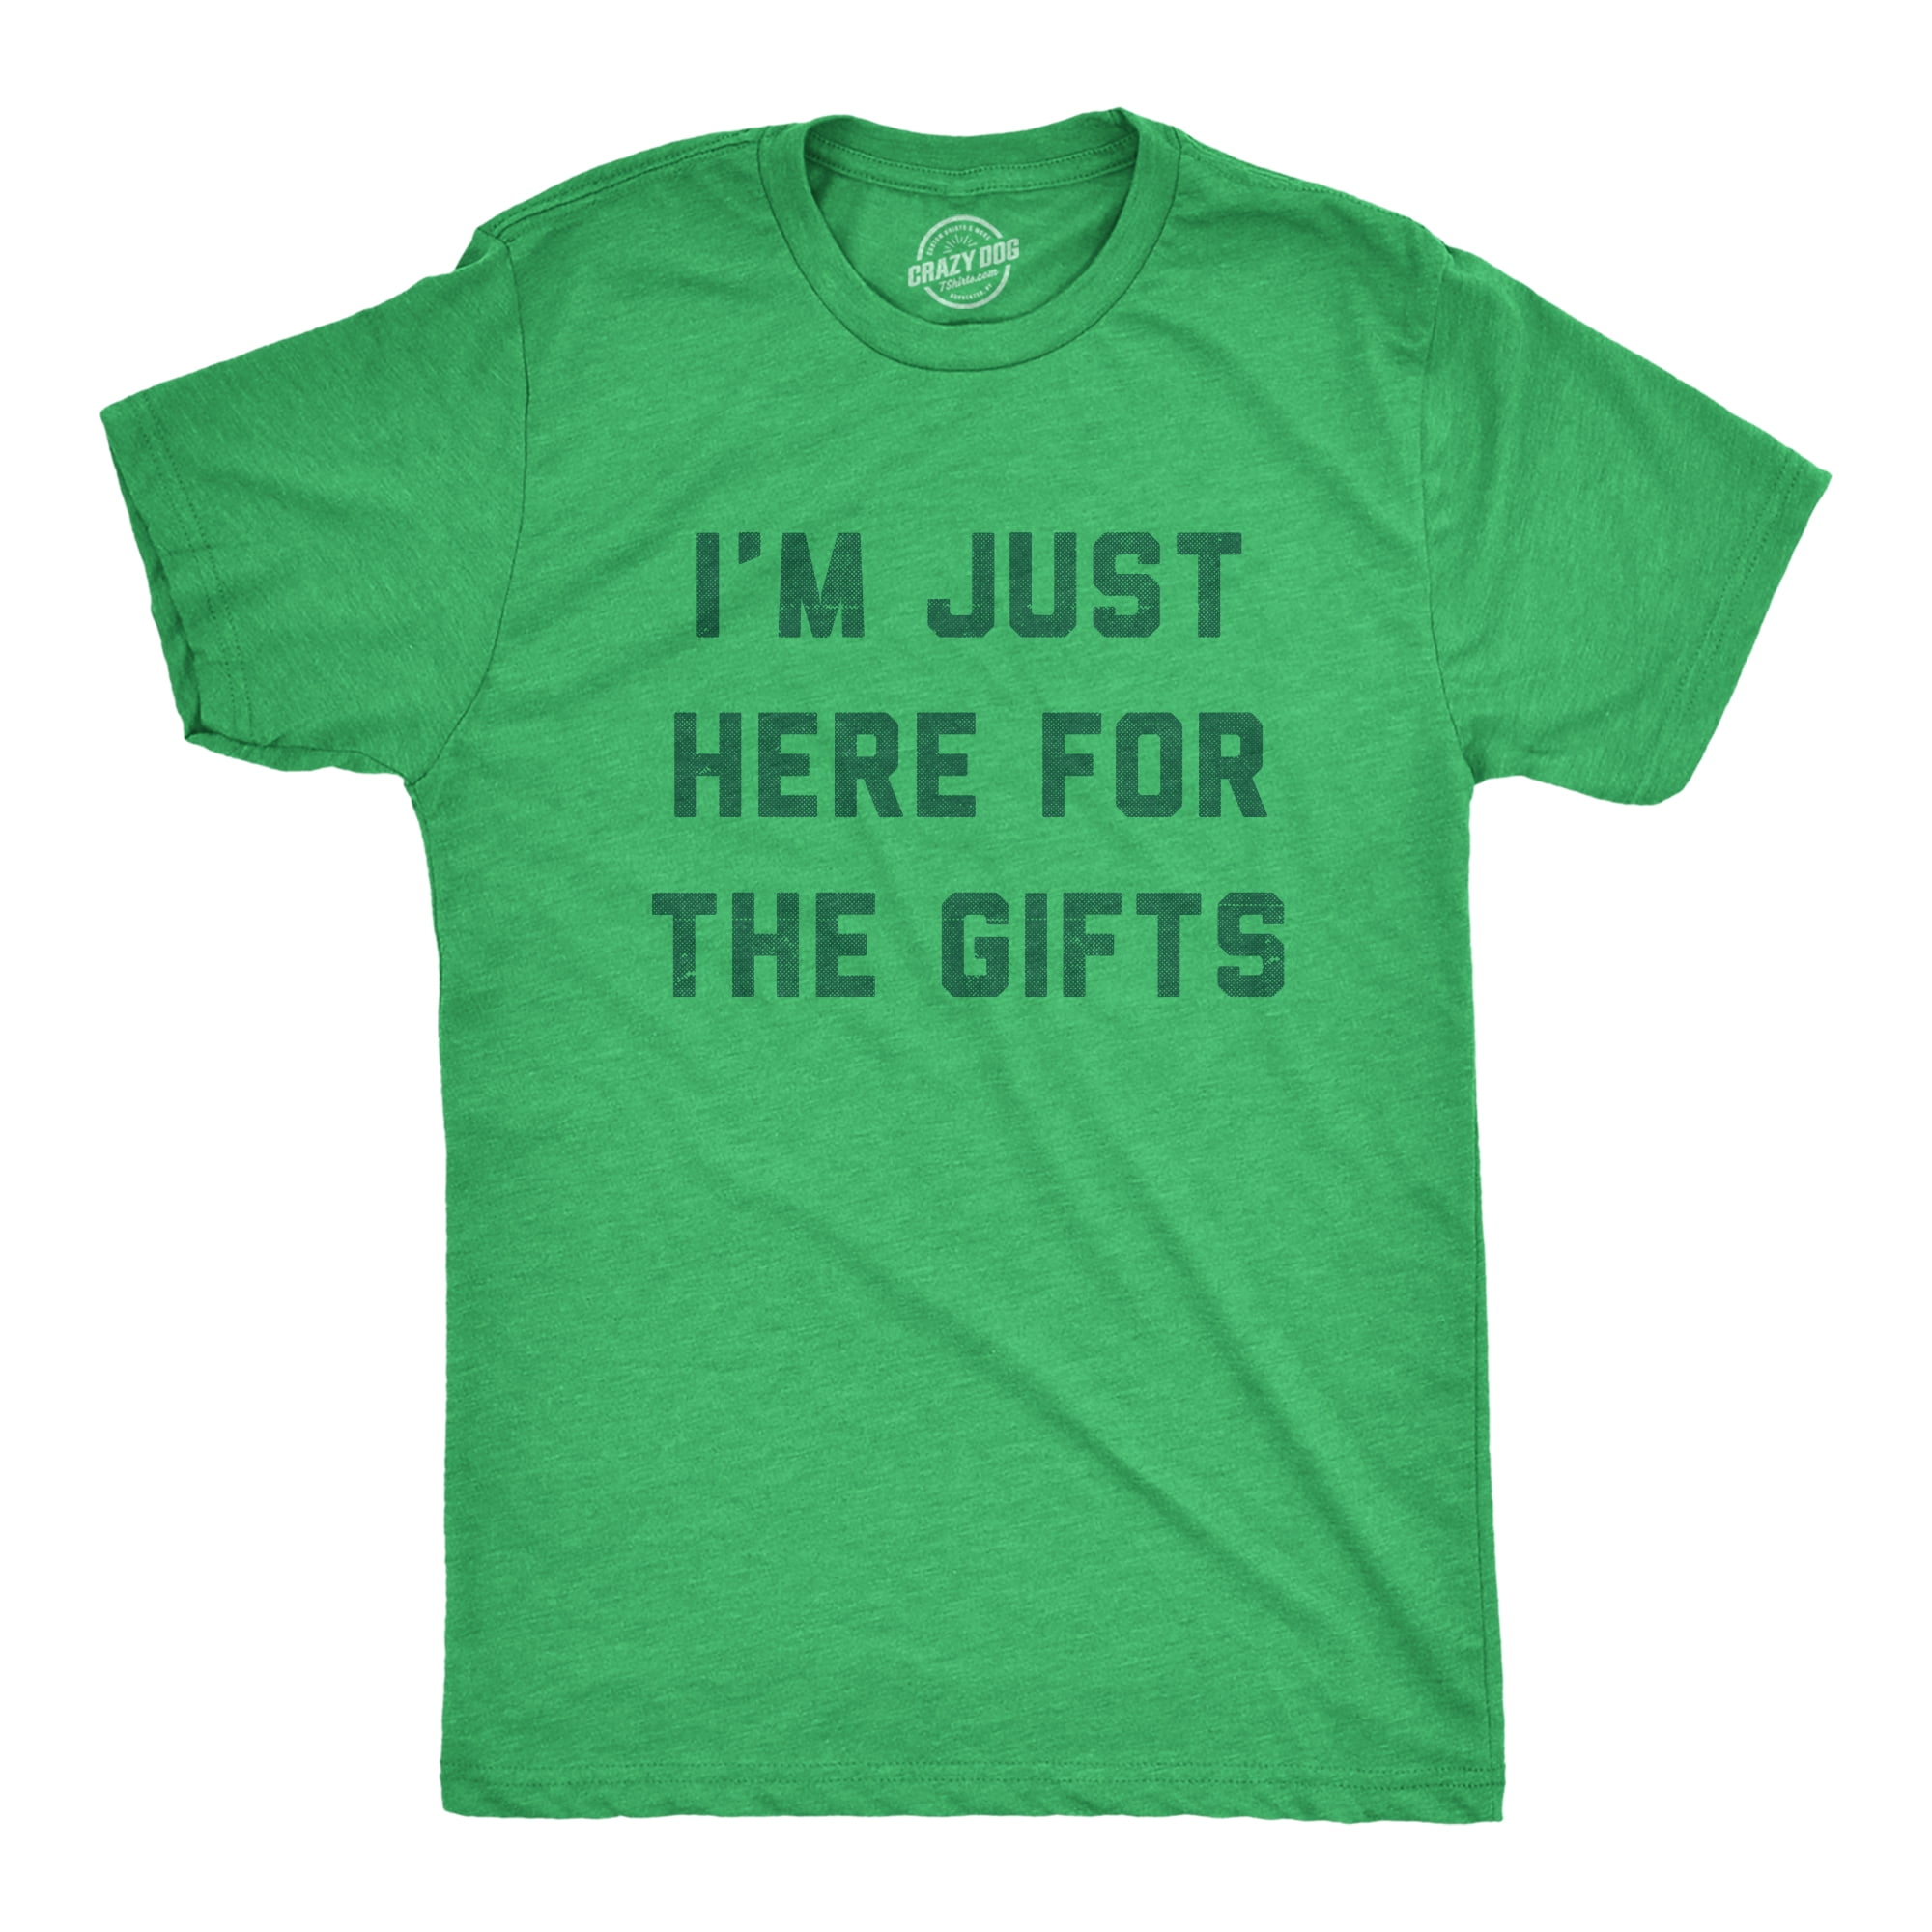 Mens Im Just Here For The Gifts T Shirt Funny Selfish Xmas Present Joke Tee  For Guys (Heather Green - GIFTS) - XXL Graphic Tees 